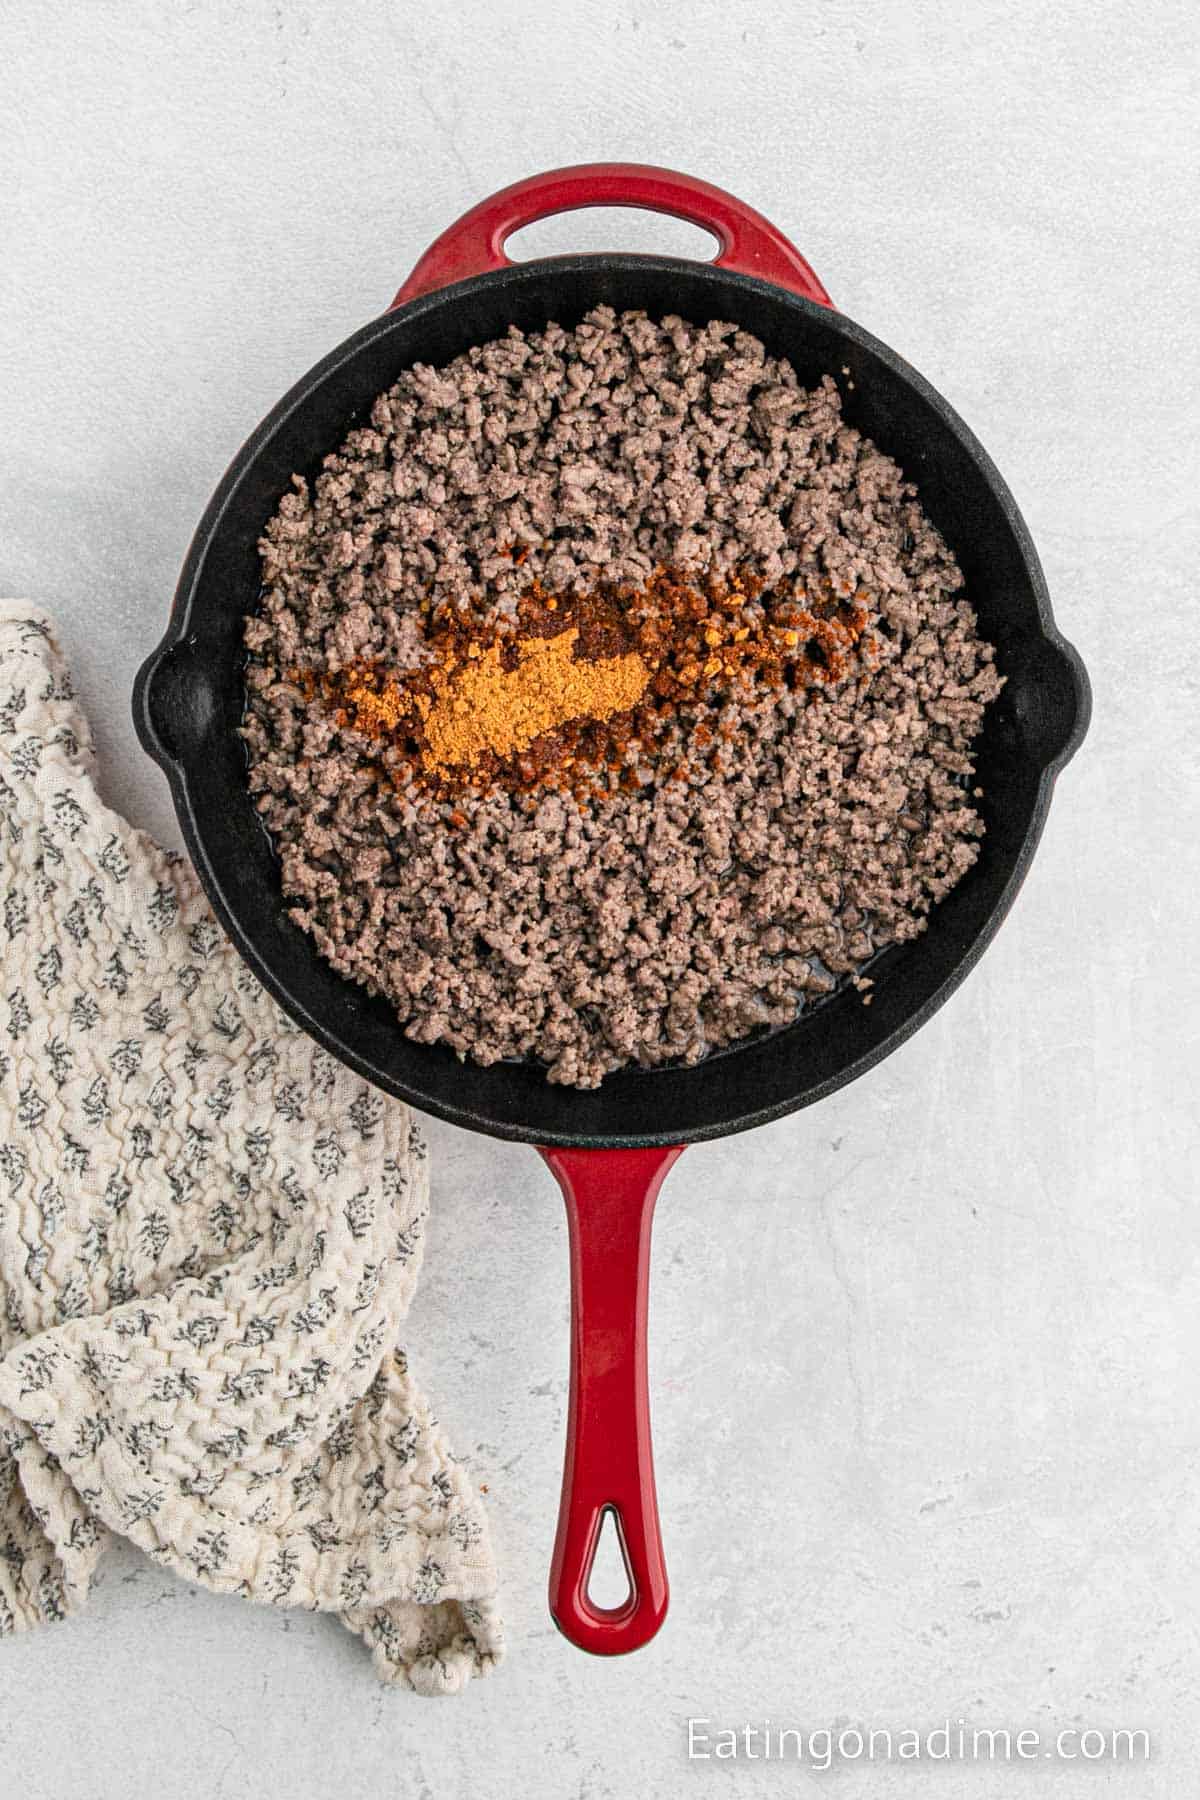 Cooking ground beef with taco seasoning in a skillet